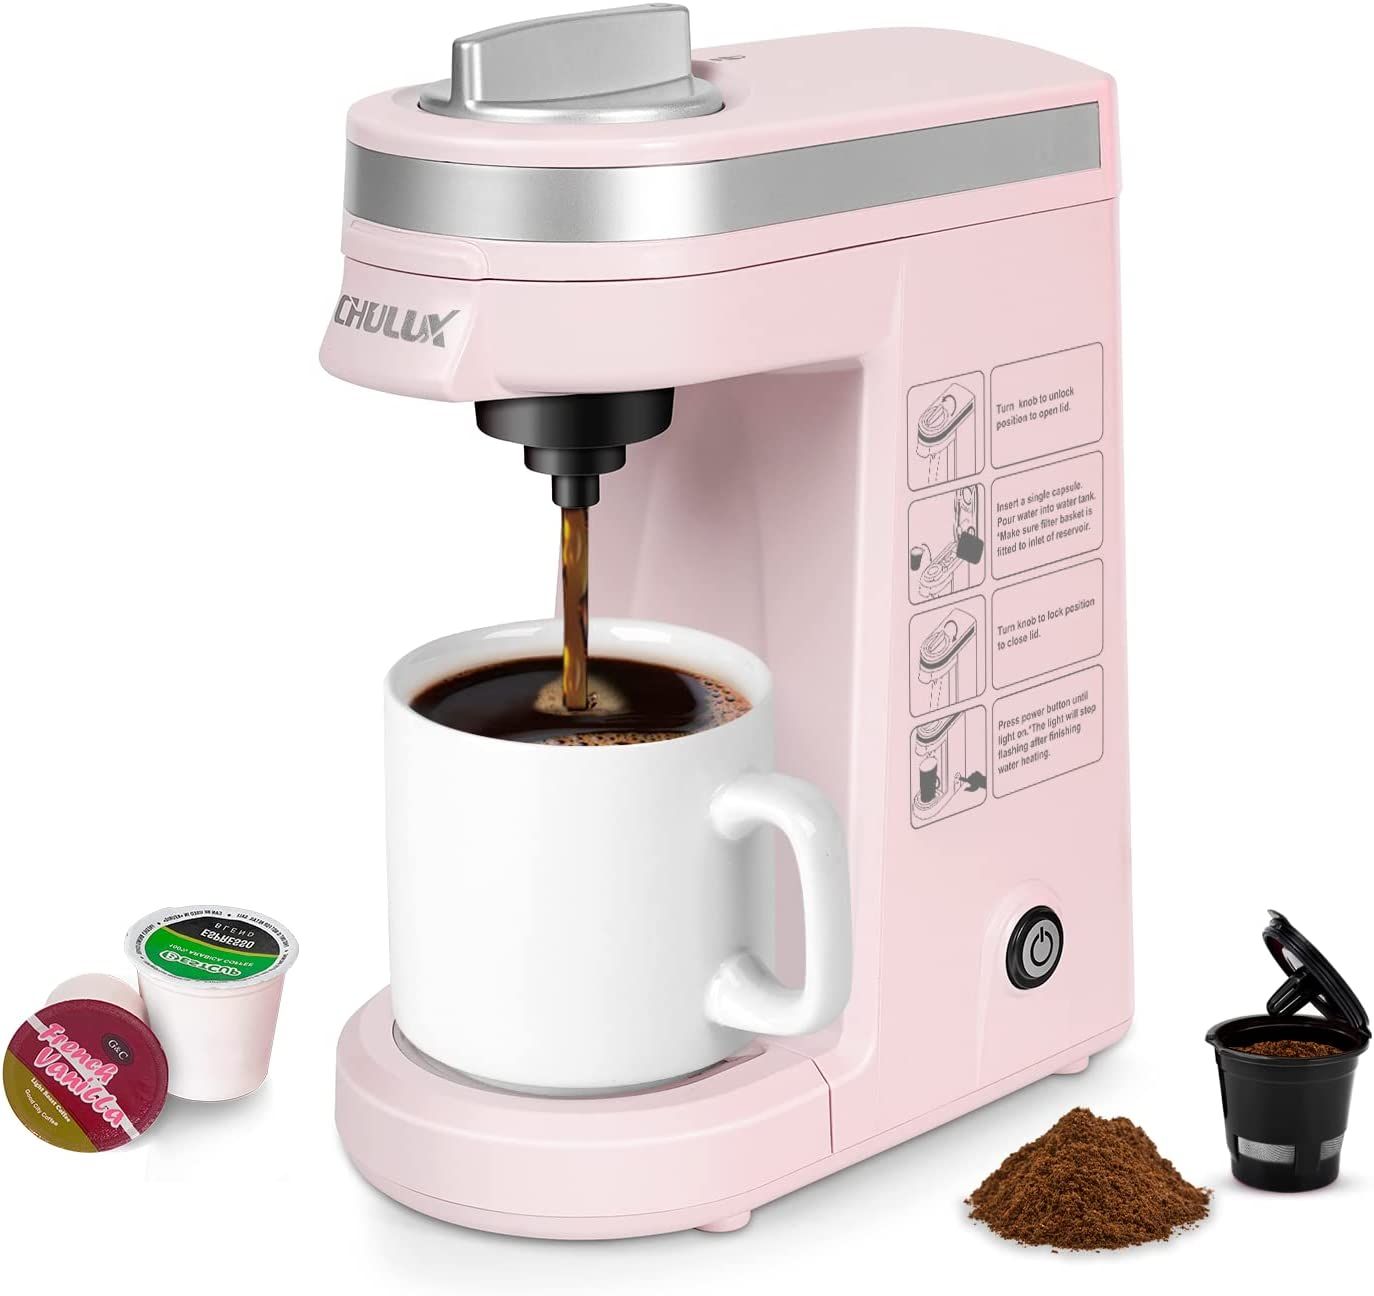 CHULUX Single Serve Coffee Maker,One Button Operation with Auto Shut-Off for Coffee and Tea with ... | Amazon (US)